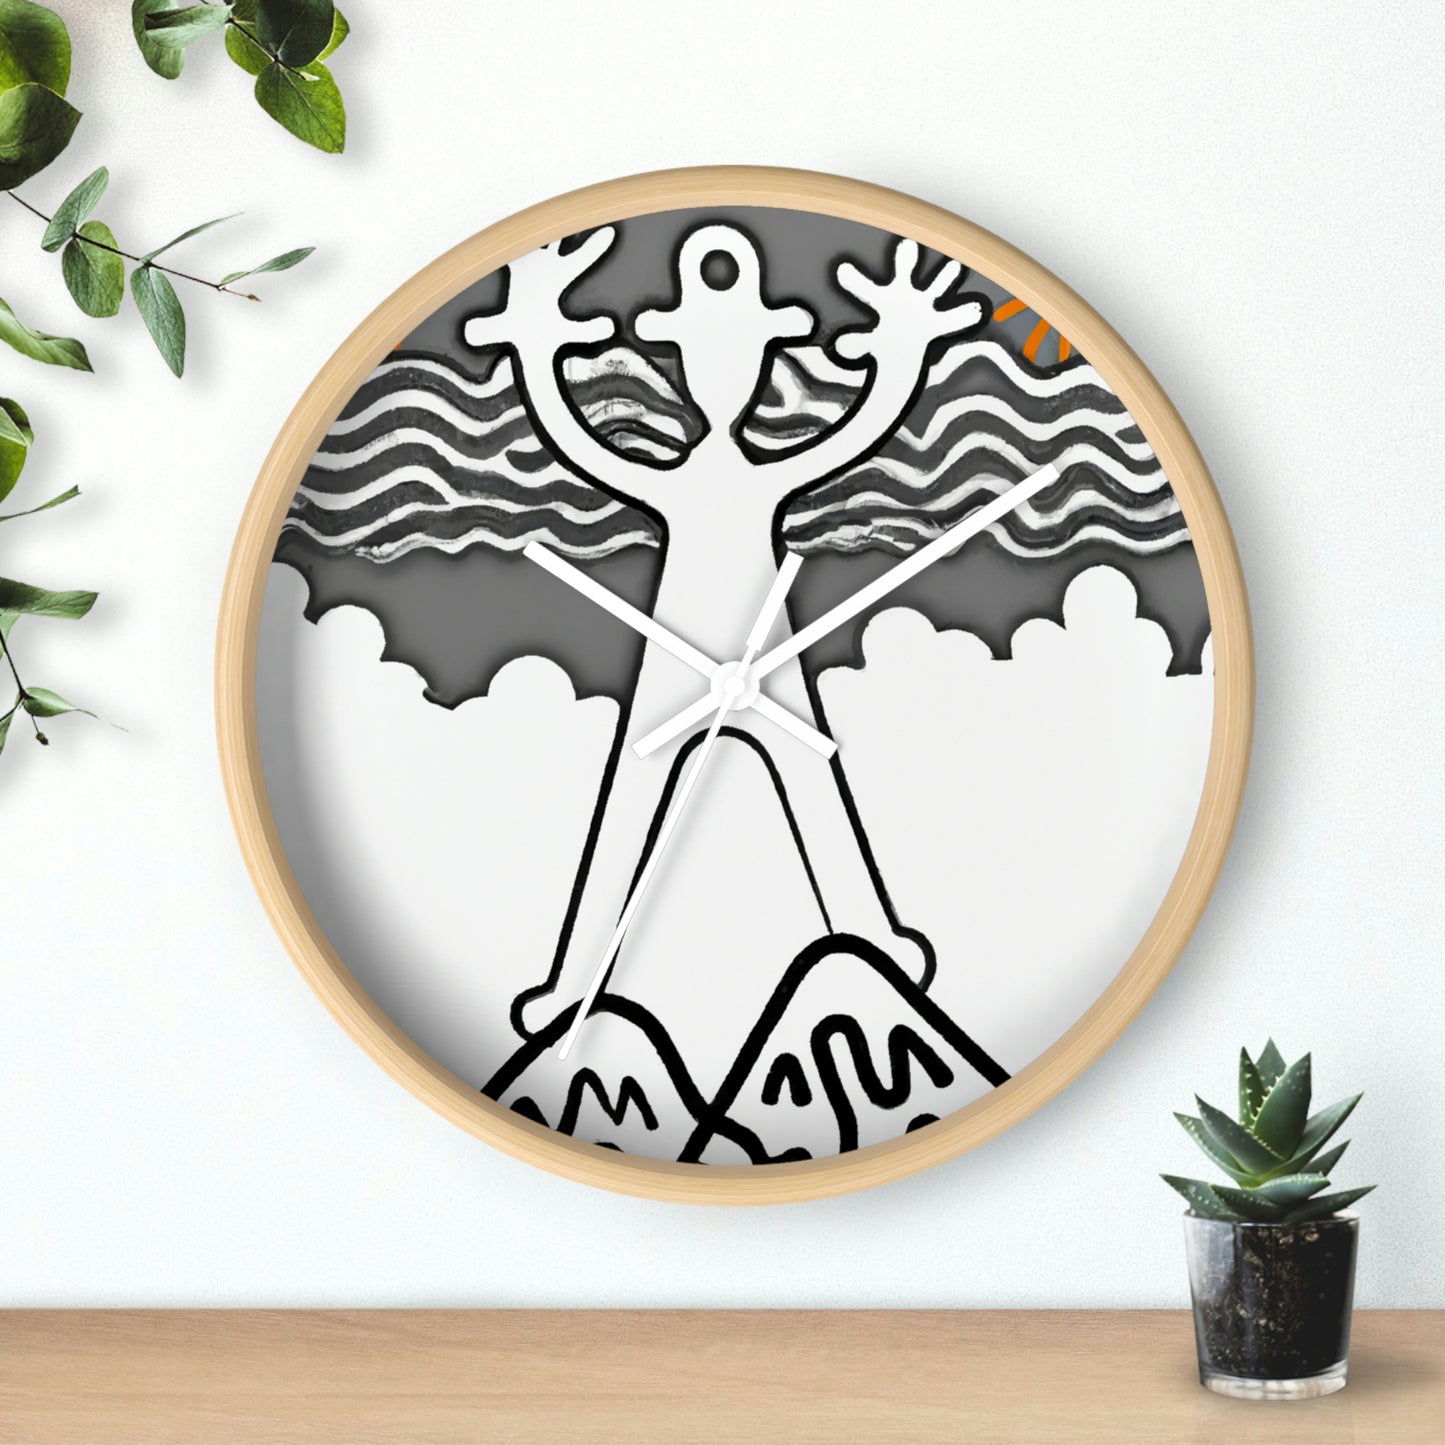 The Mystic Mist of the Mountain - The Alien Wall Clock